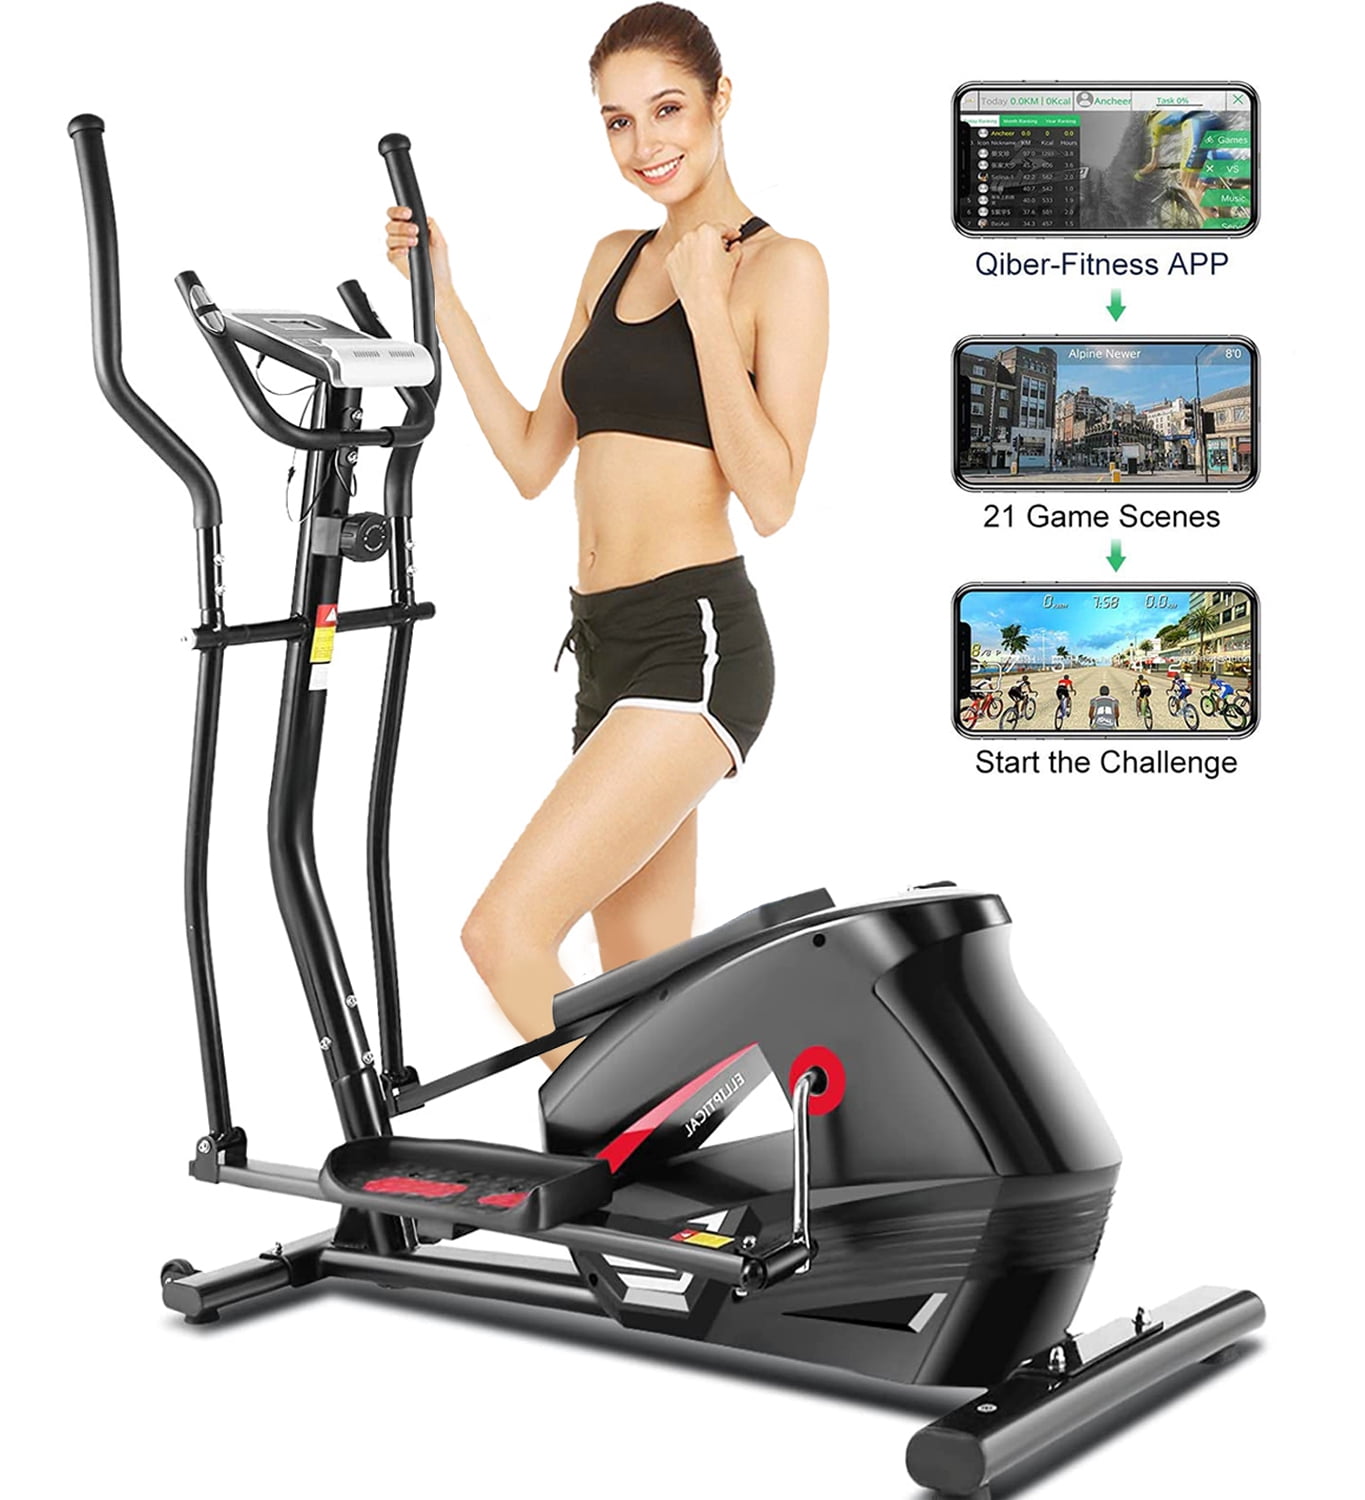 Details about   Elliptical Machine Trainer Magnetic Quiet Driven with LCD Monitor Home Use US 